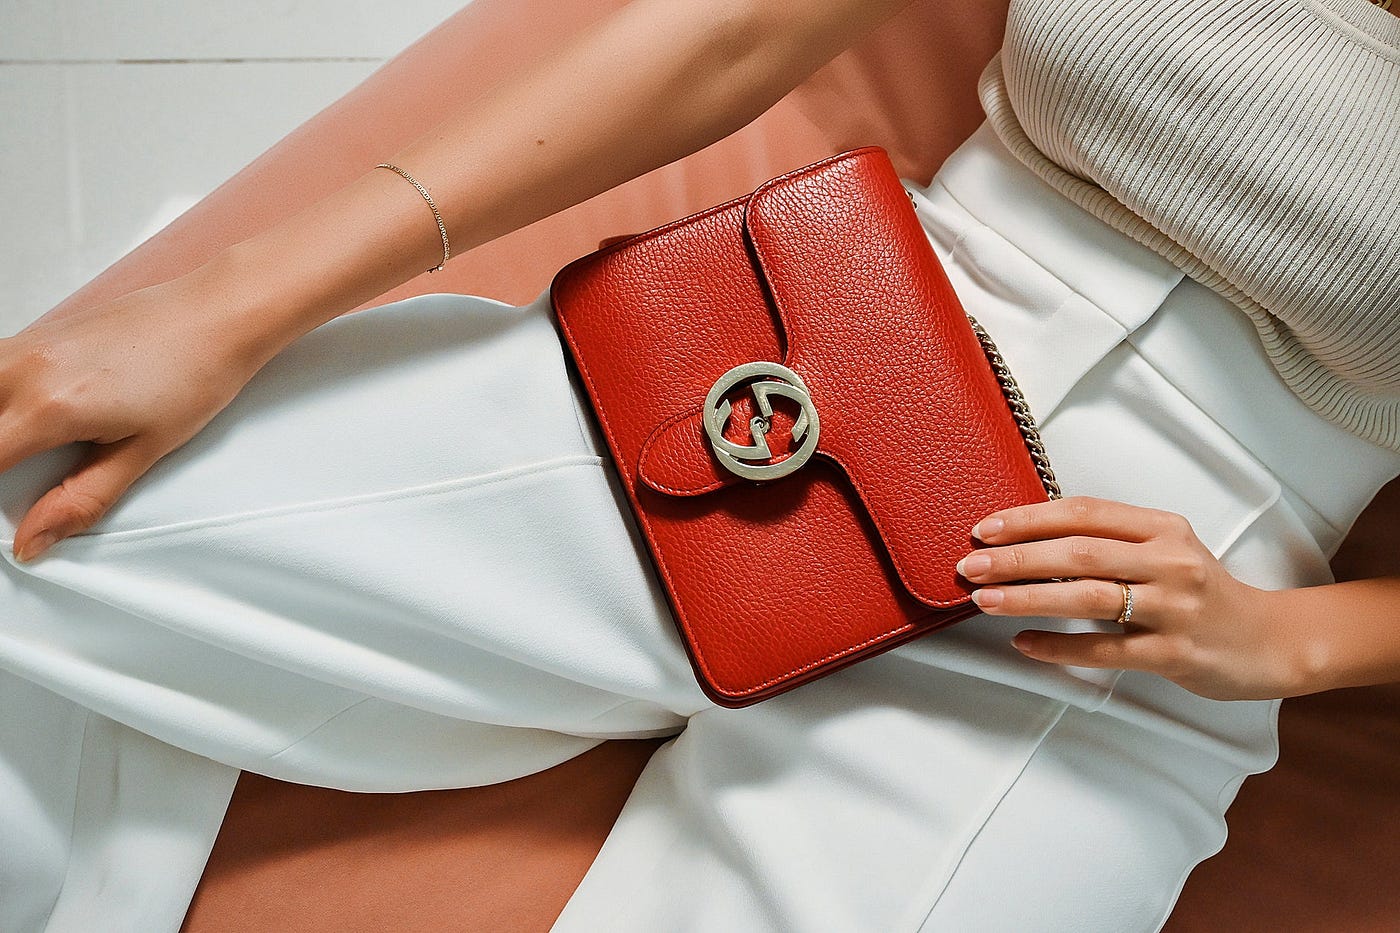 Is a Chanel Handbag Actually a Good Investment?, by Lexy Silverstein